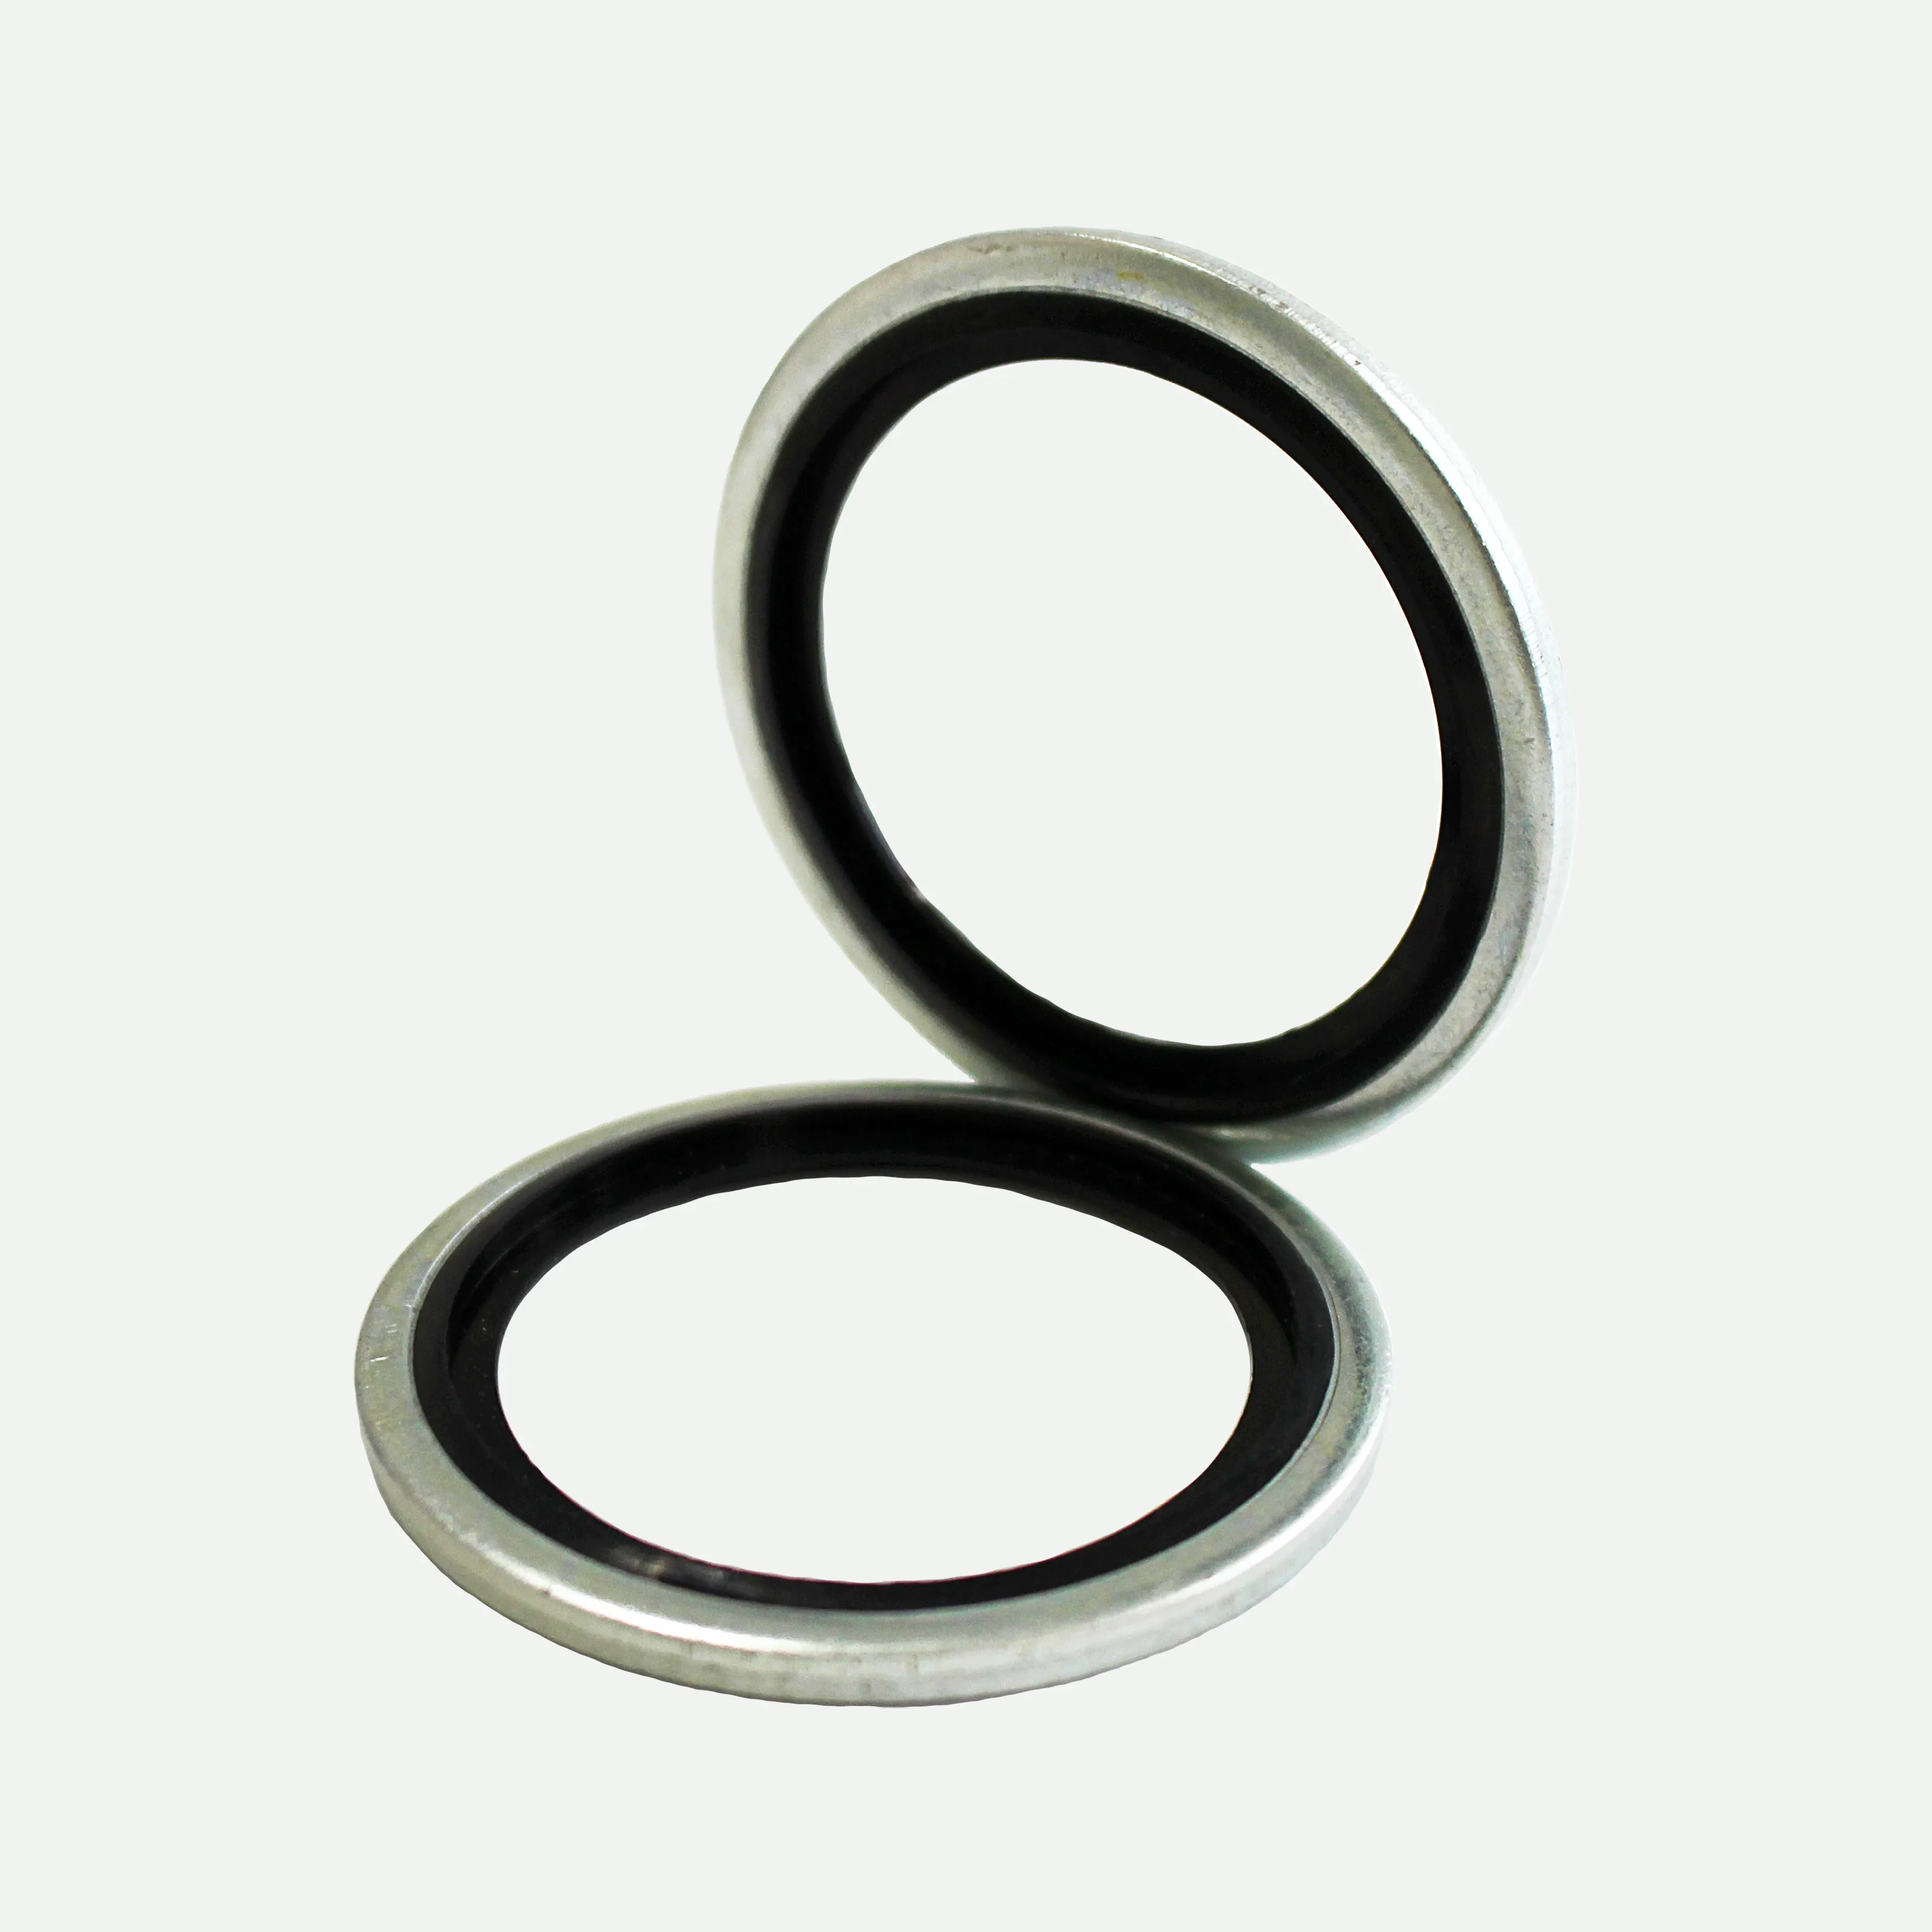 3/8 Bonded Sealing Washer 5/8 Bonded Seal Dowty Washer Imperial Diamentions Hydraulic Bonded Washer Oil Seal